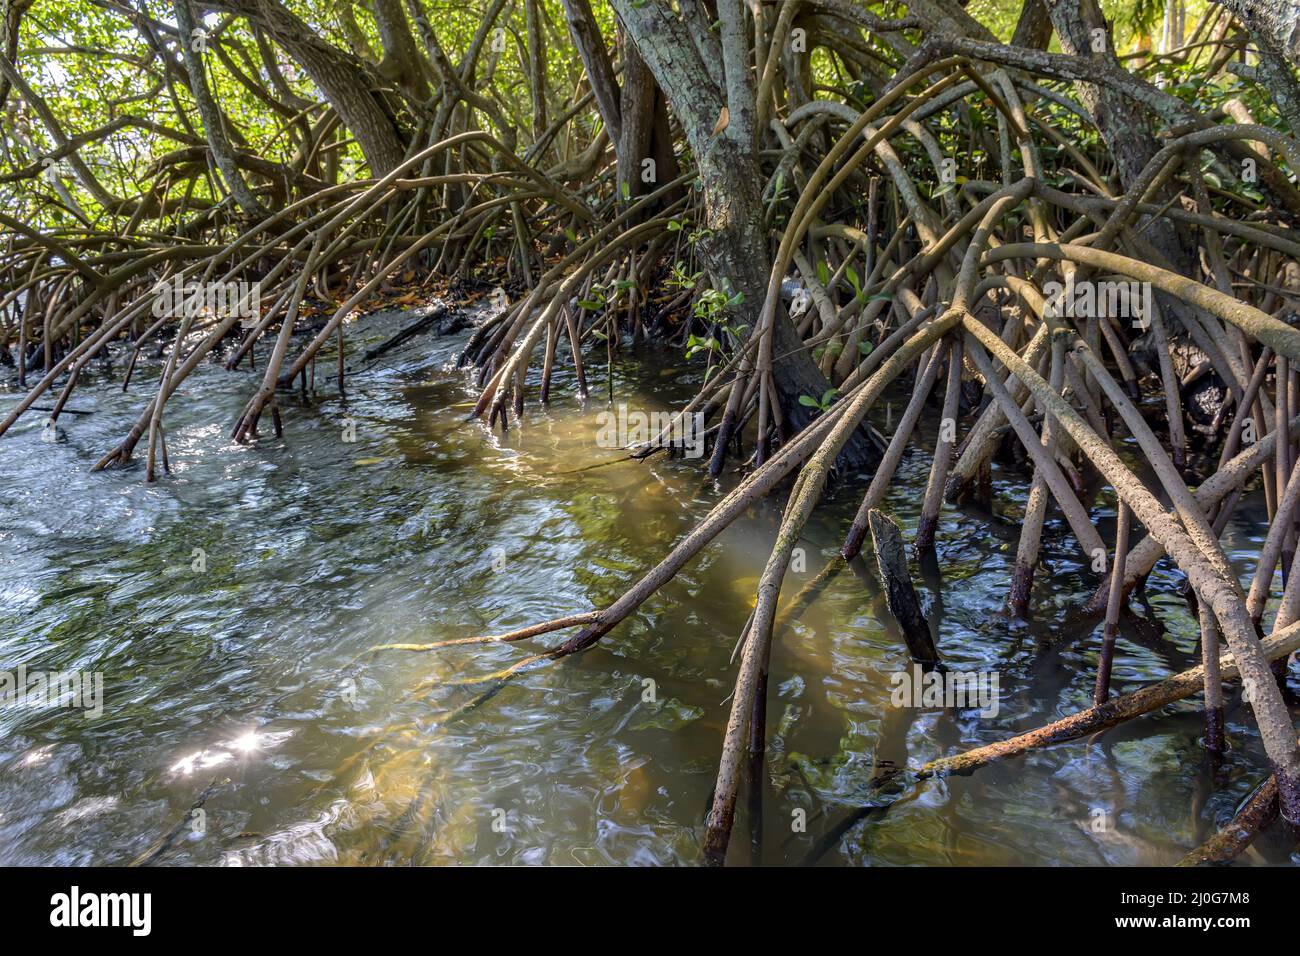 Roots and tropical vegetation typical of mangroves Stock Photo